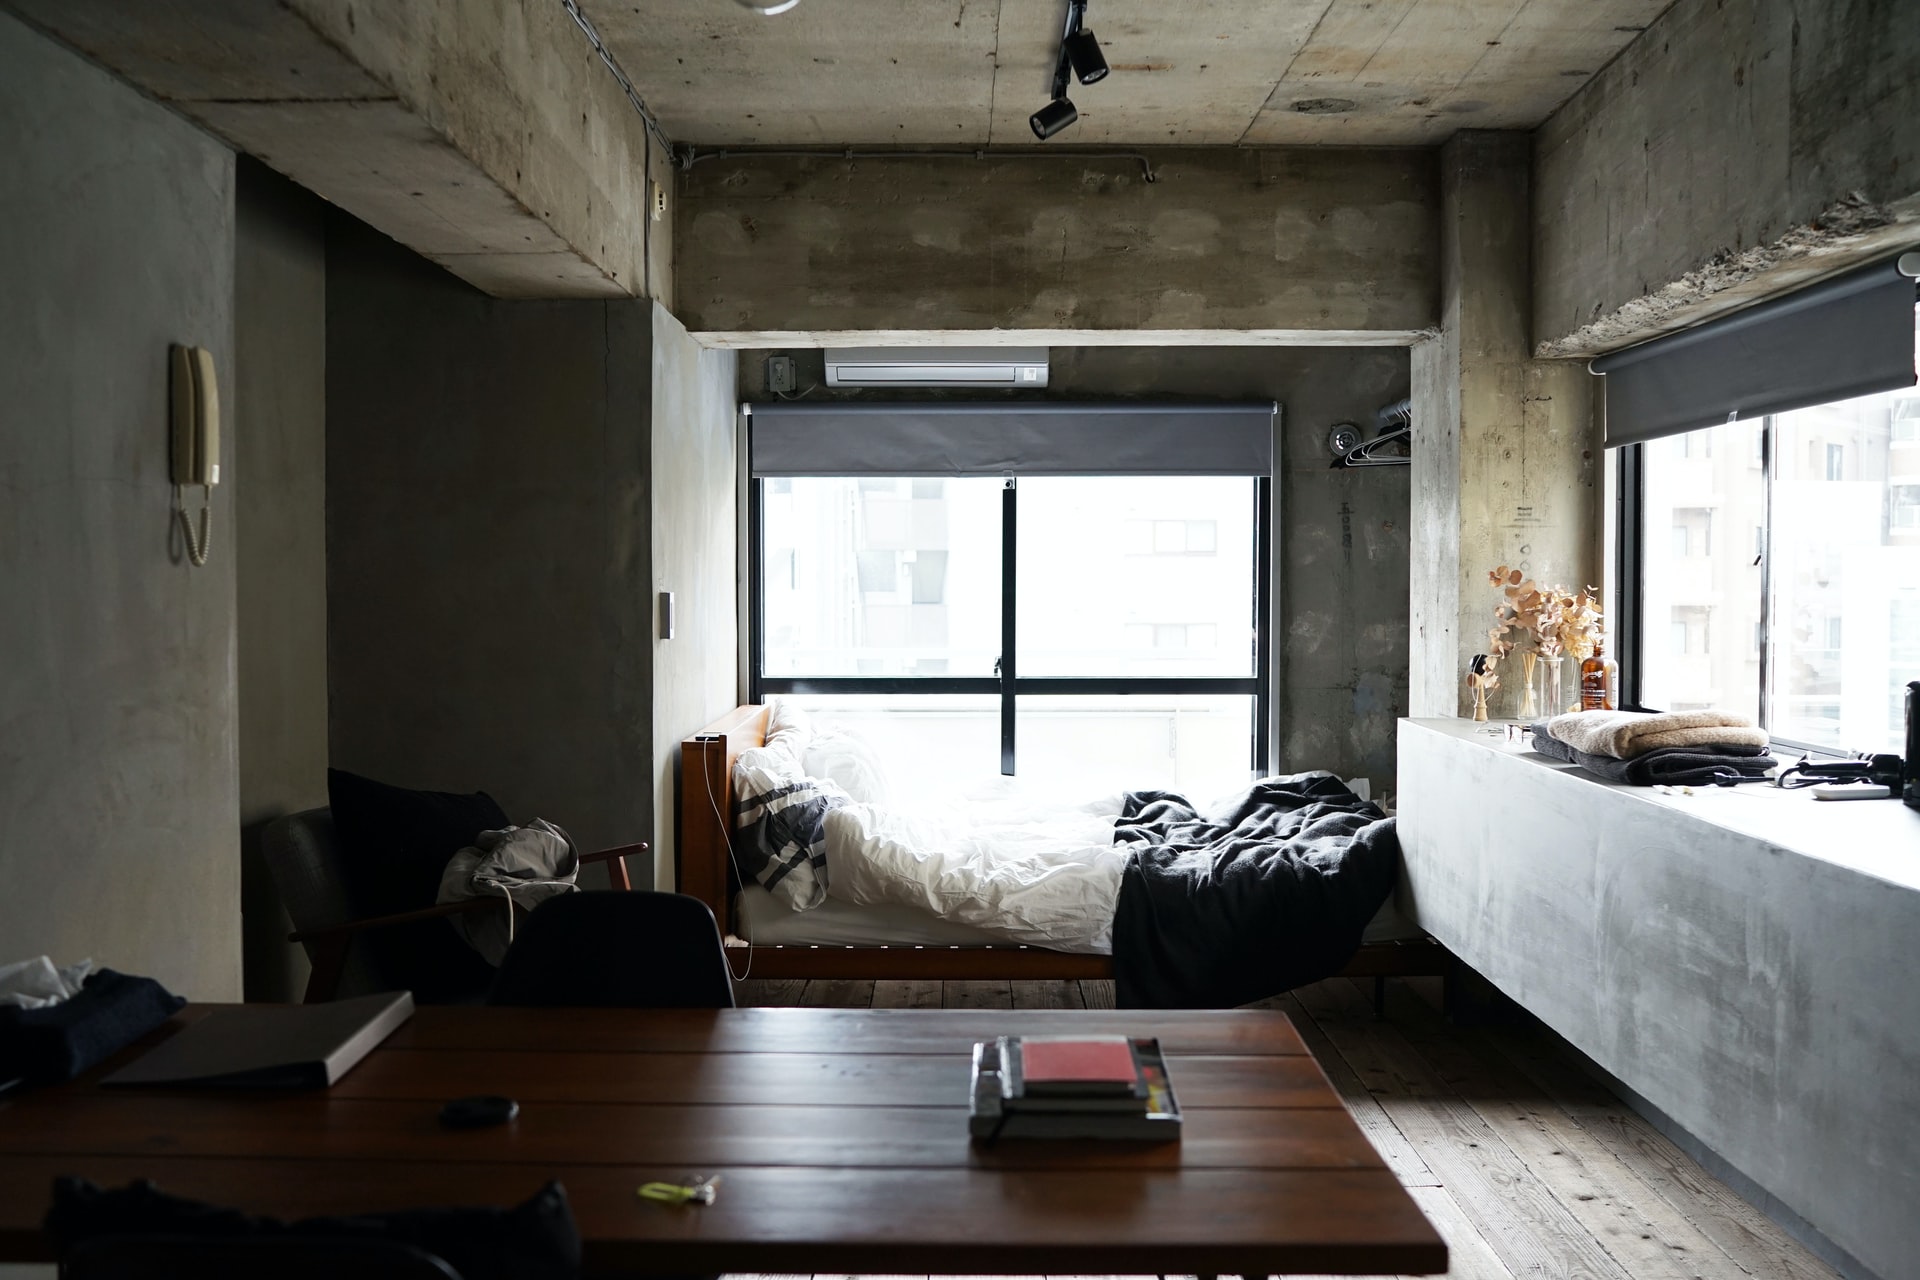 6 Best Studio Apartment Decor Ideas to Maximize Space [#4 is Awesome]